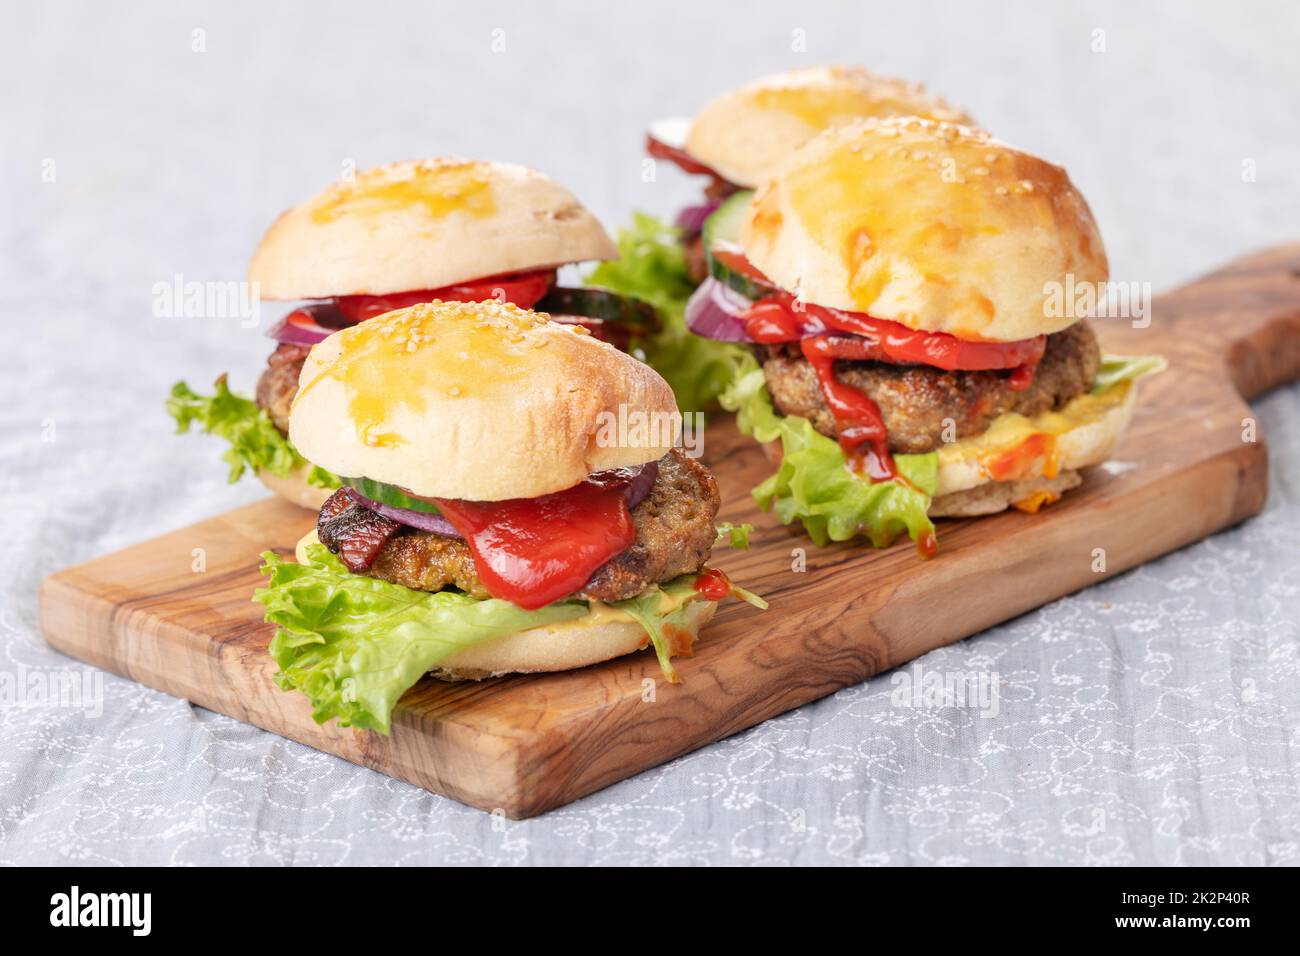 hamburger, burger, four, small, food, beef, onion, snack, cheese, meal, background, lettuce, tomato, onion, fresh, meat, sandwich, tasty, fried, homemade, fast, white, grilled, gourmet, vegetable, american, barbecue, lunch, classic, bread, bun, wooden, de Stock Photo